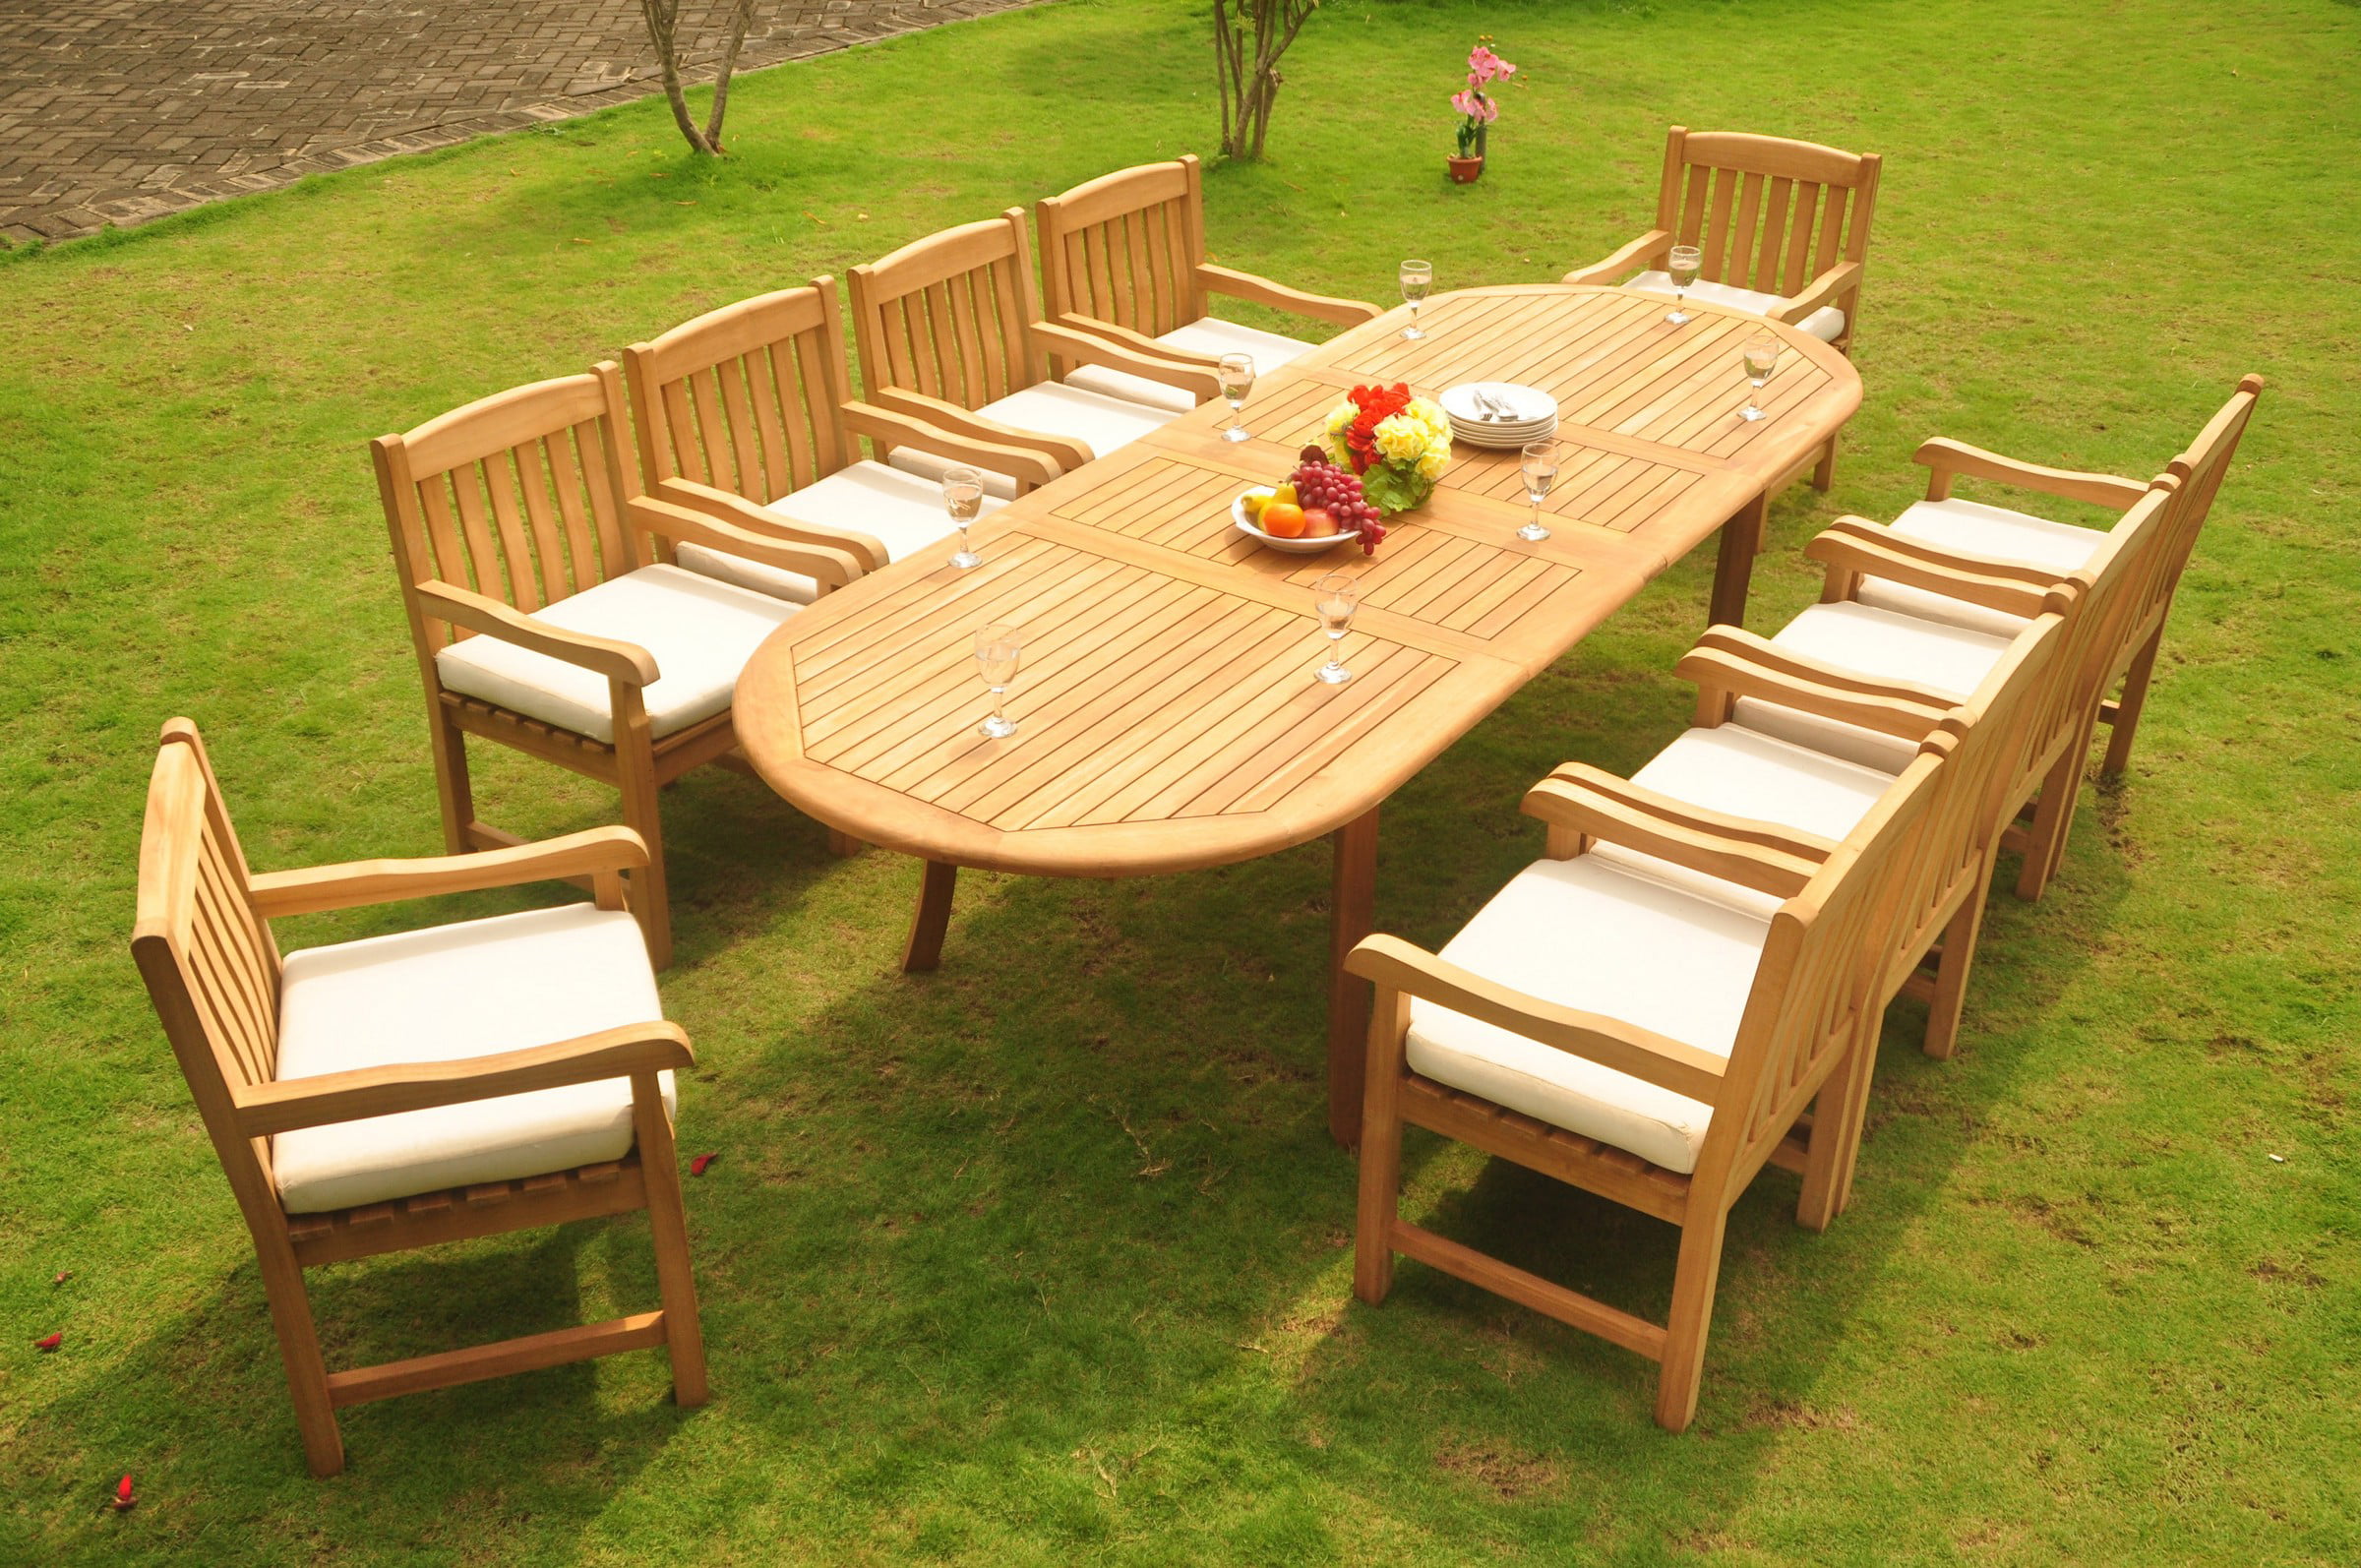 Teak Patio Furniture: Marrying Functionality With Aesthetics